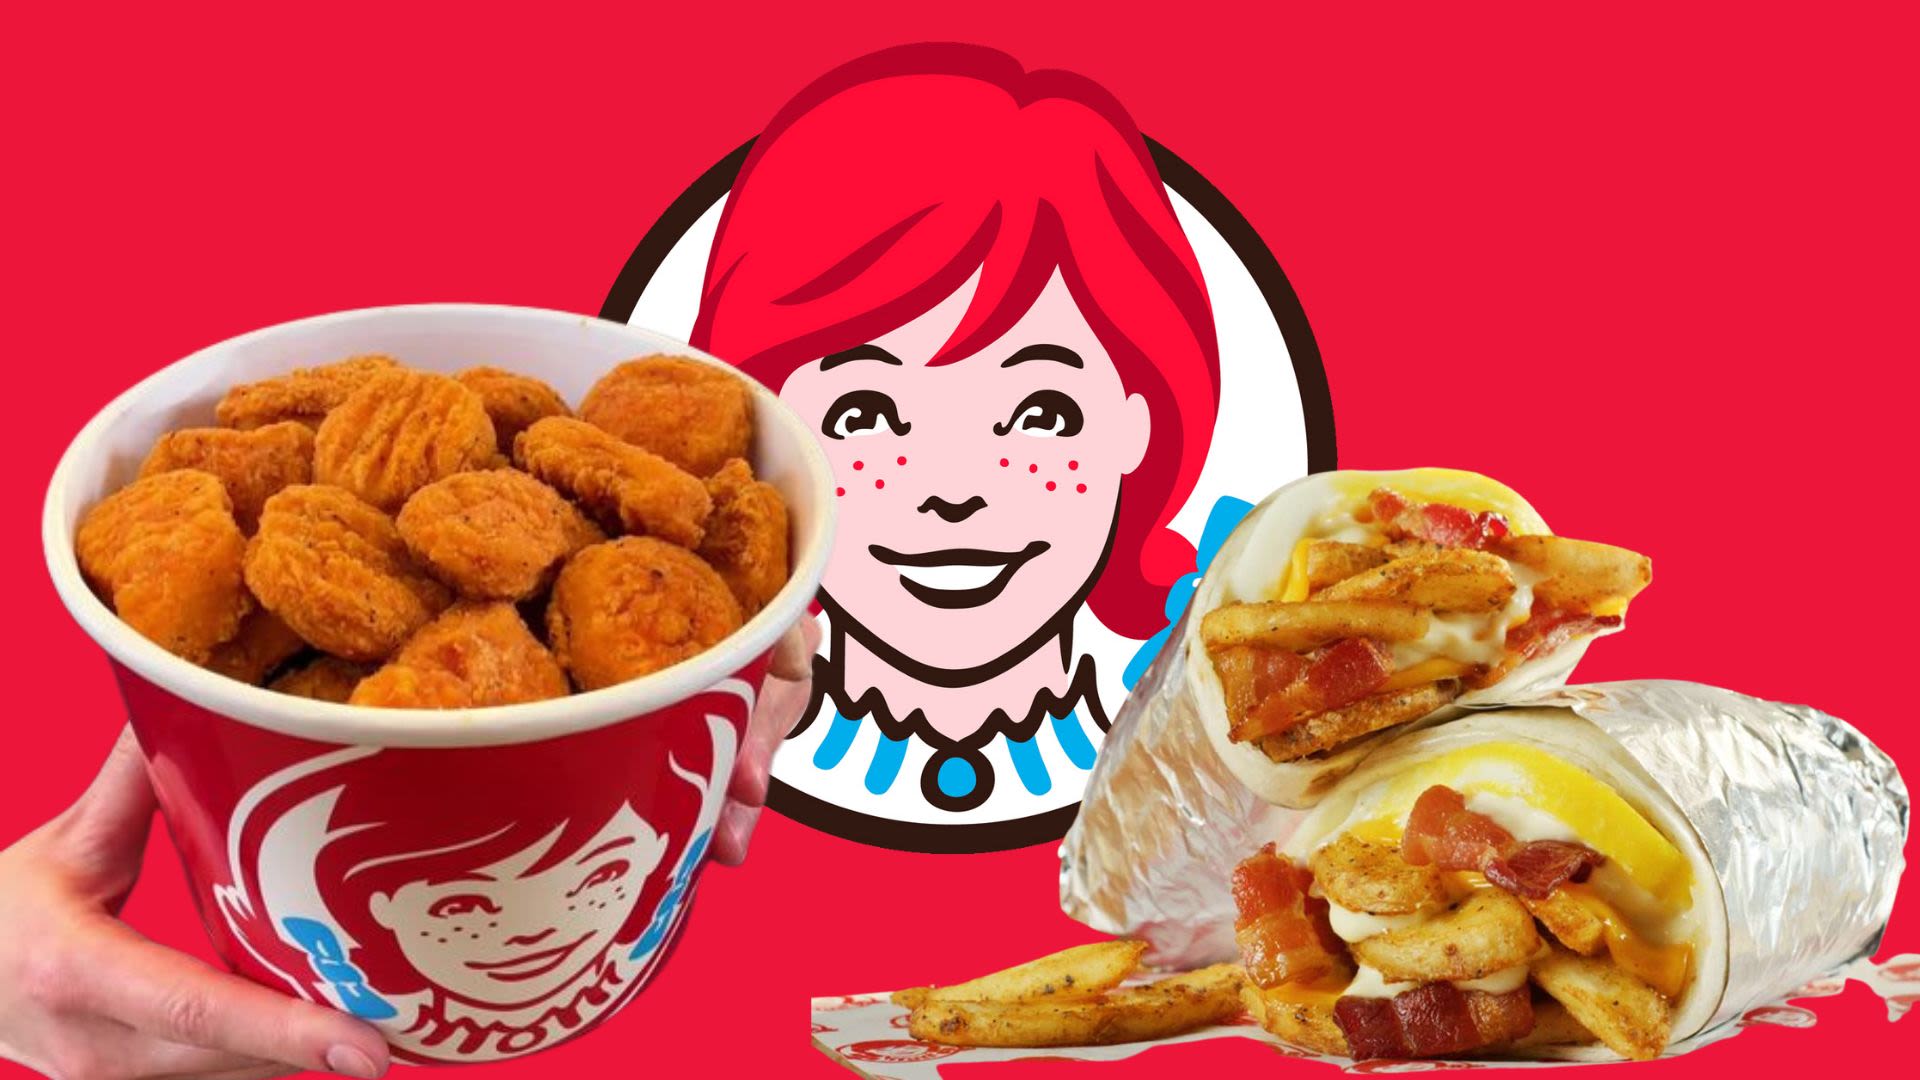 Wendy’s debuts 50 nugget party pack and new breakfast items - Dexerto